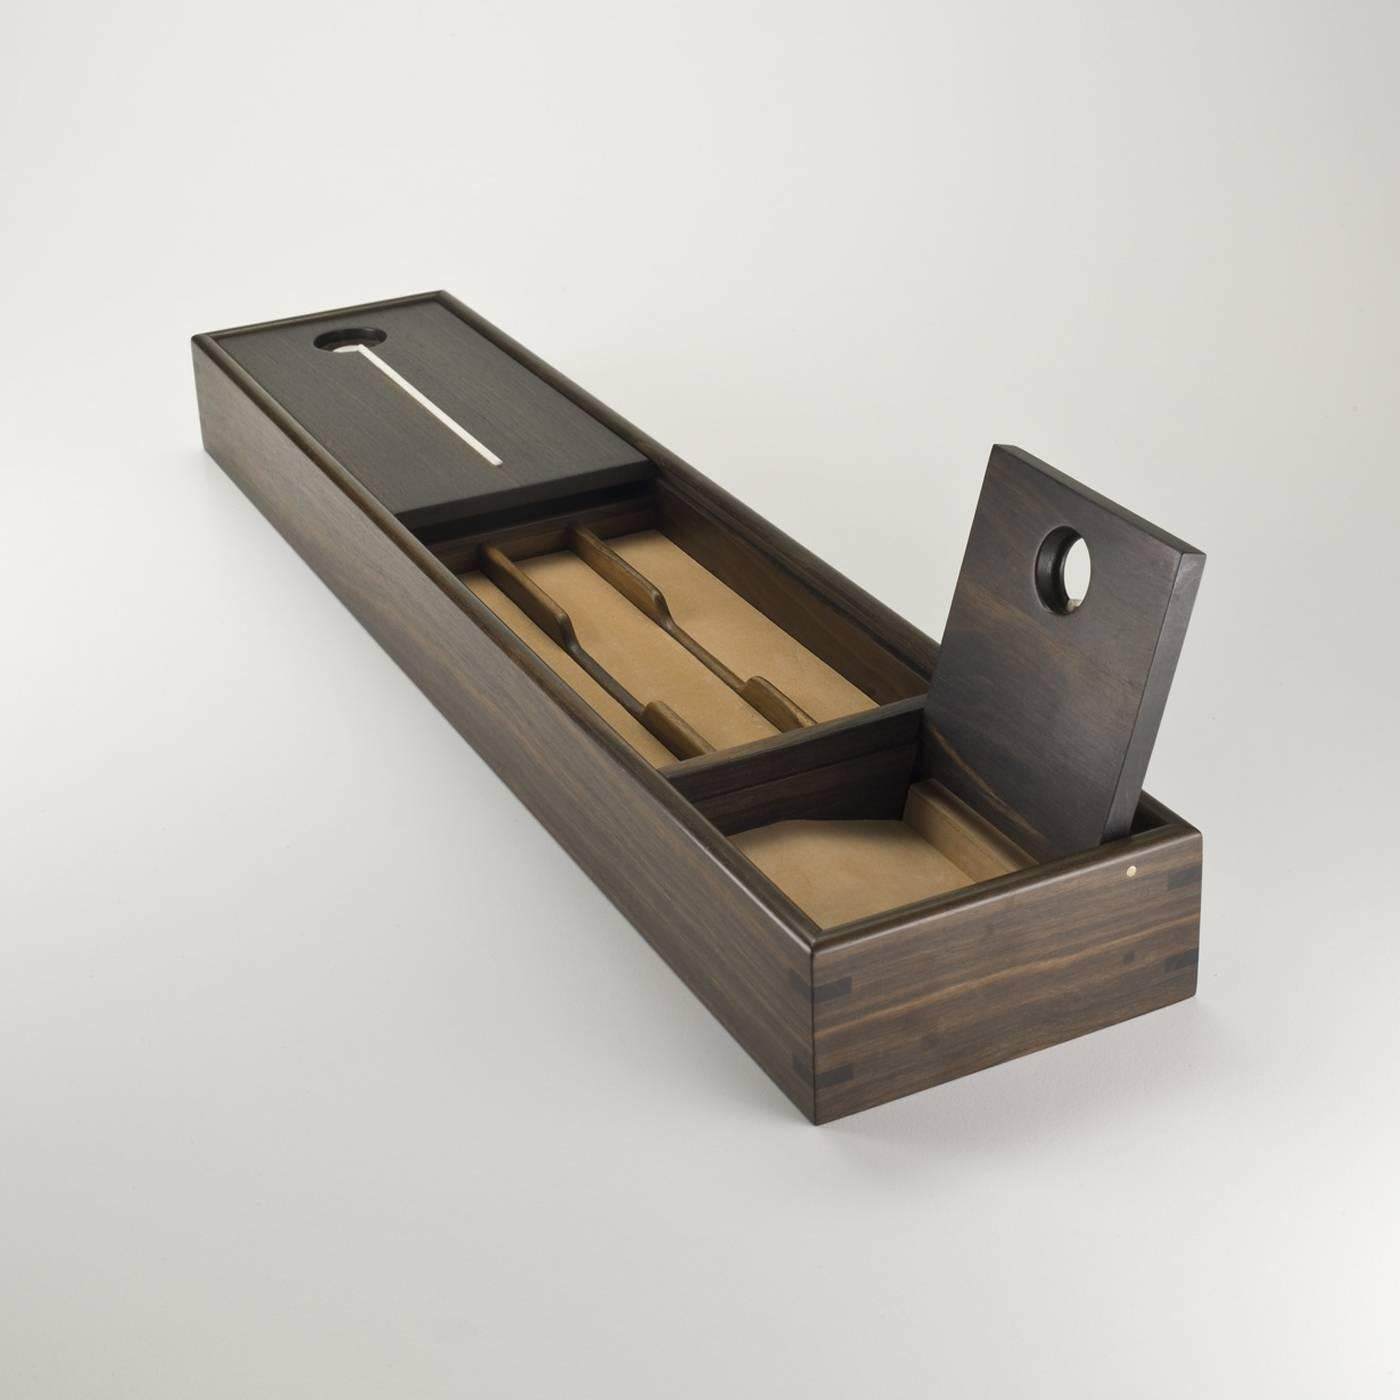 This elegant pen tray in ebony wood with horn accents in contrasting color has a mini-shutter that slides to cover its content and it features a side compartment for cellphones with a pivot closing. The interior is lined in nubuck leather. 

